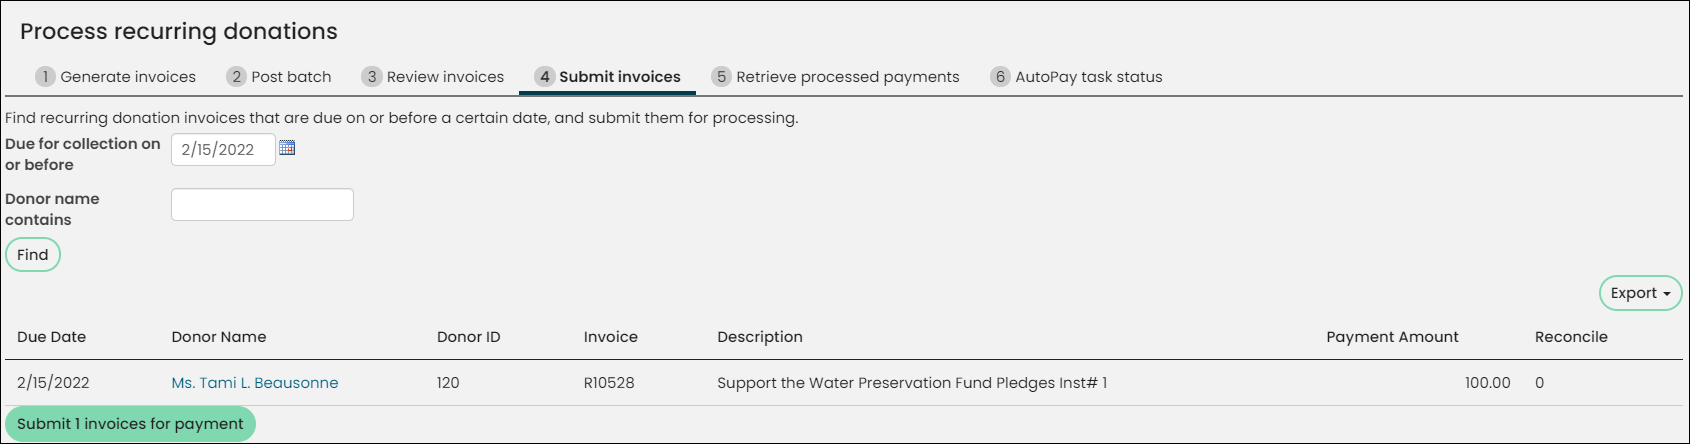 Finding invoices from the Submit invoices tab of the Process recurring donations window